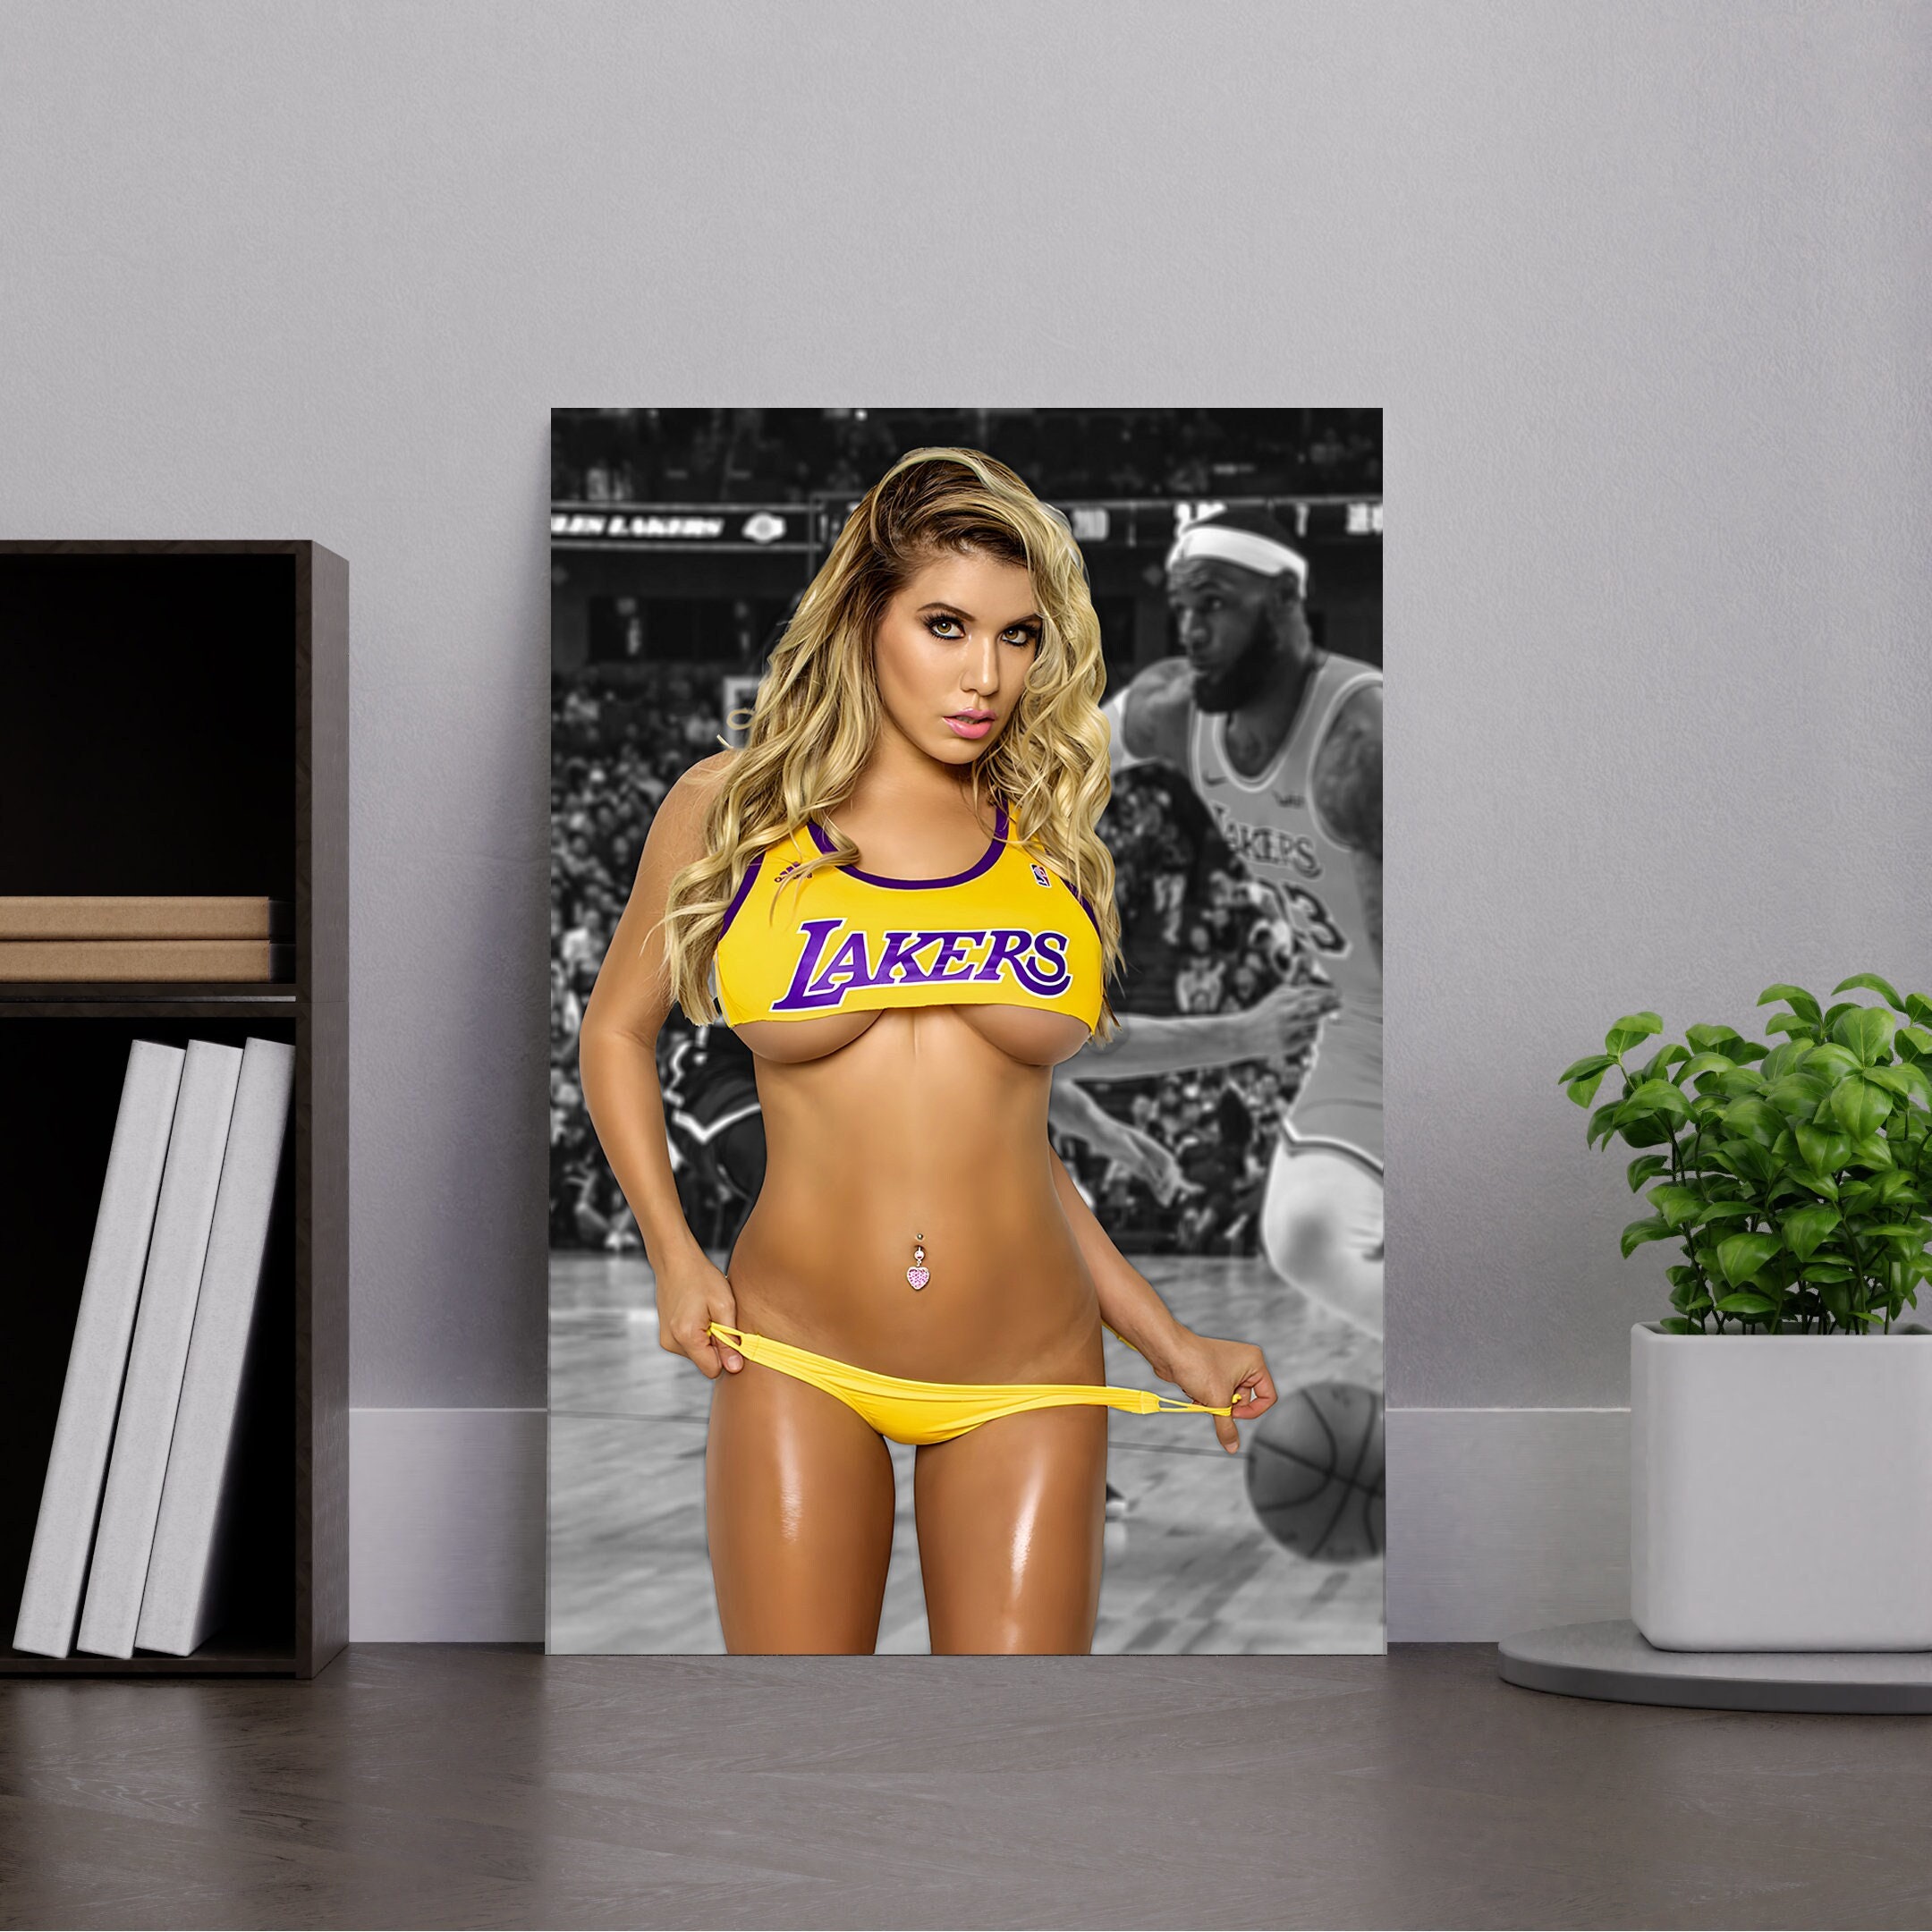 The Laker Girls Are Extremely Hot!